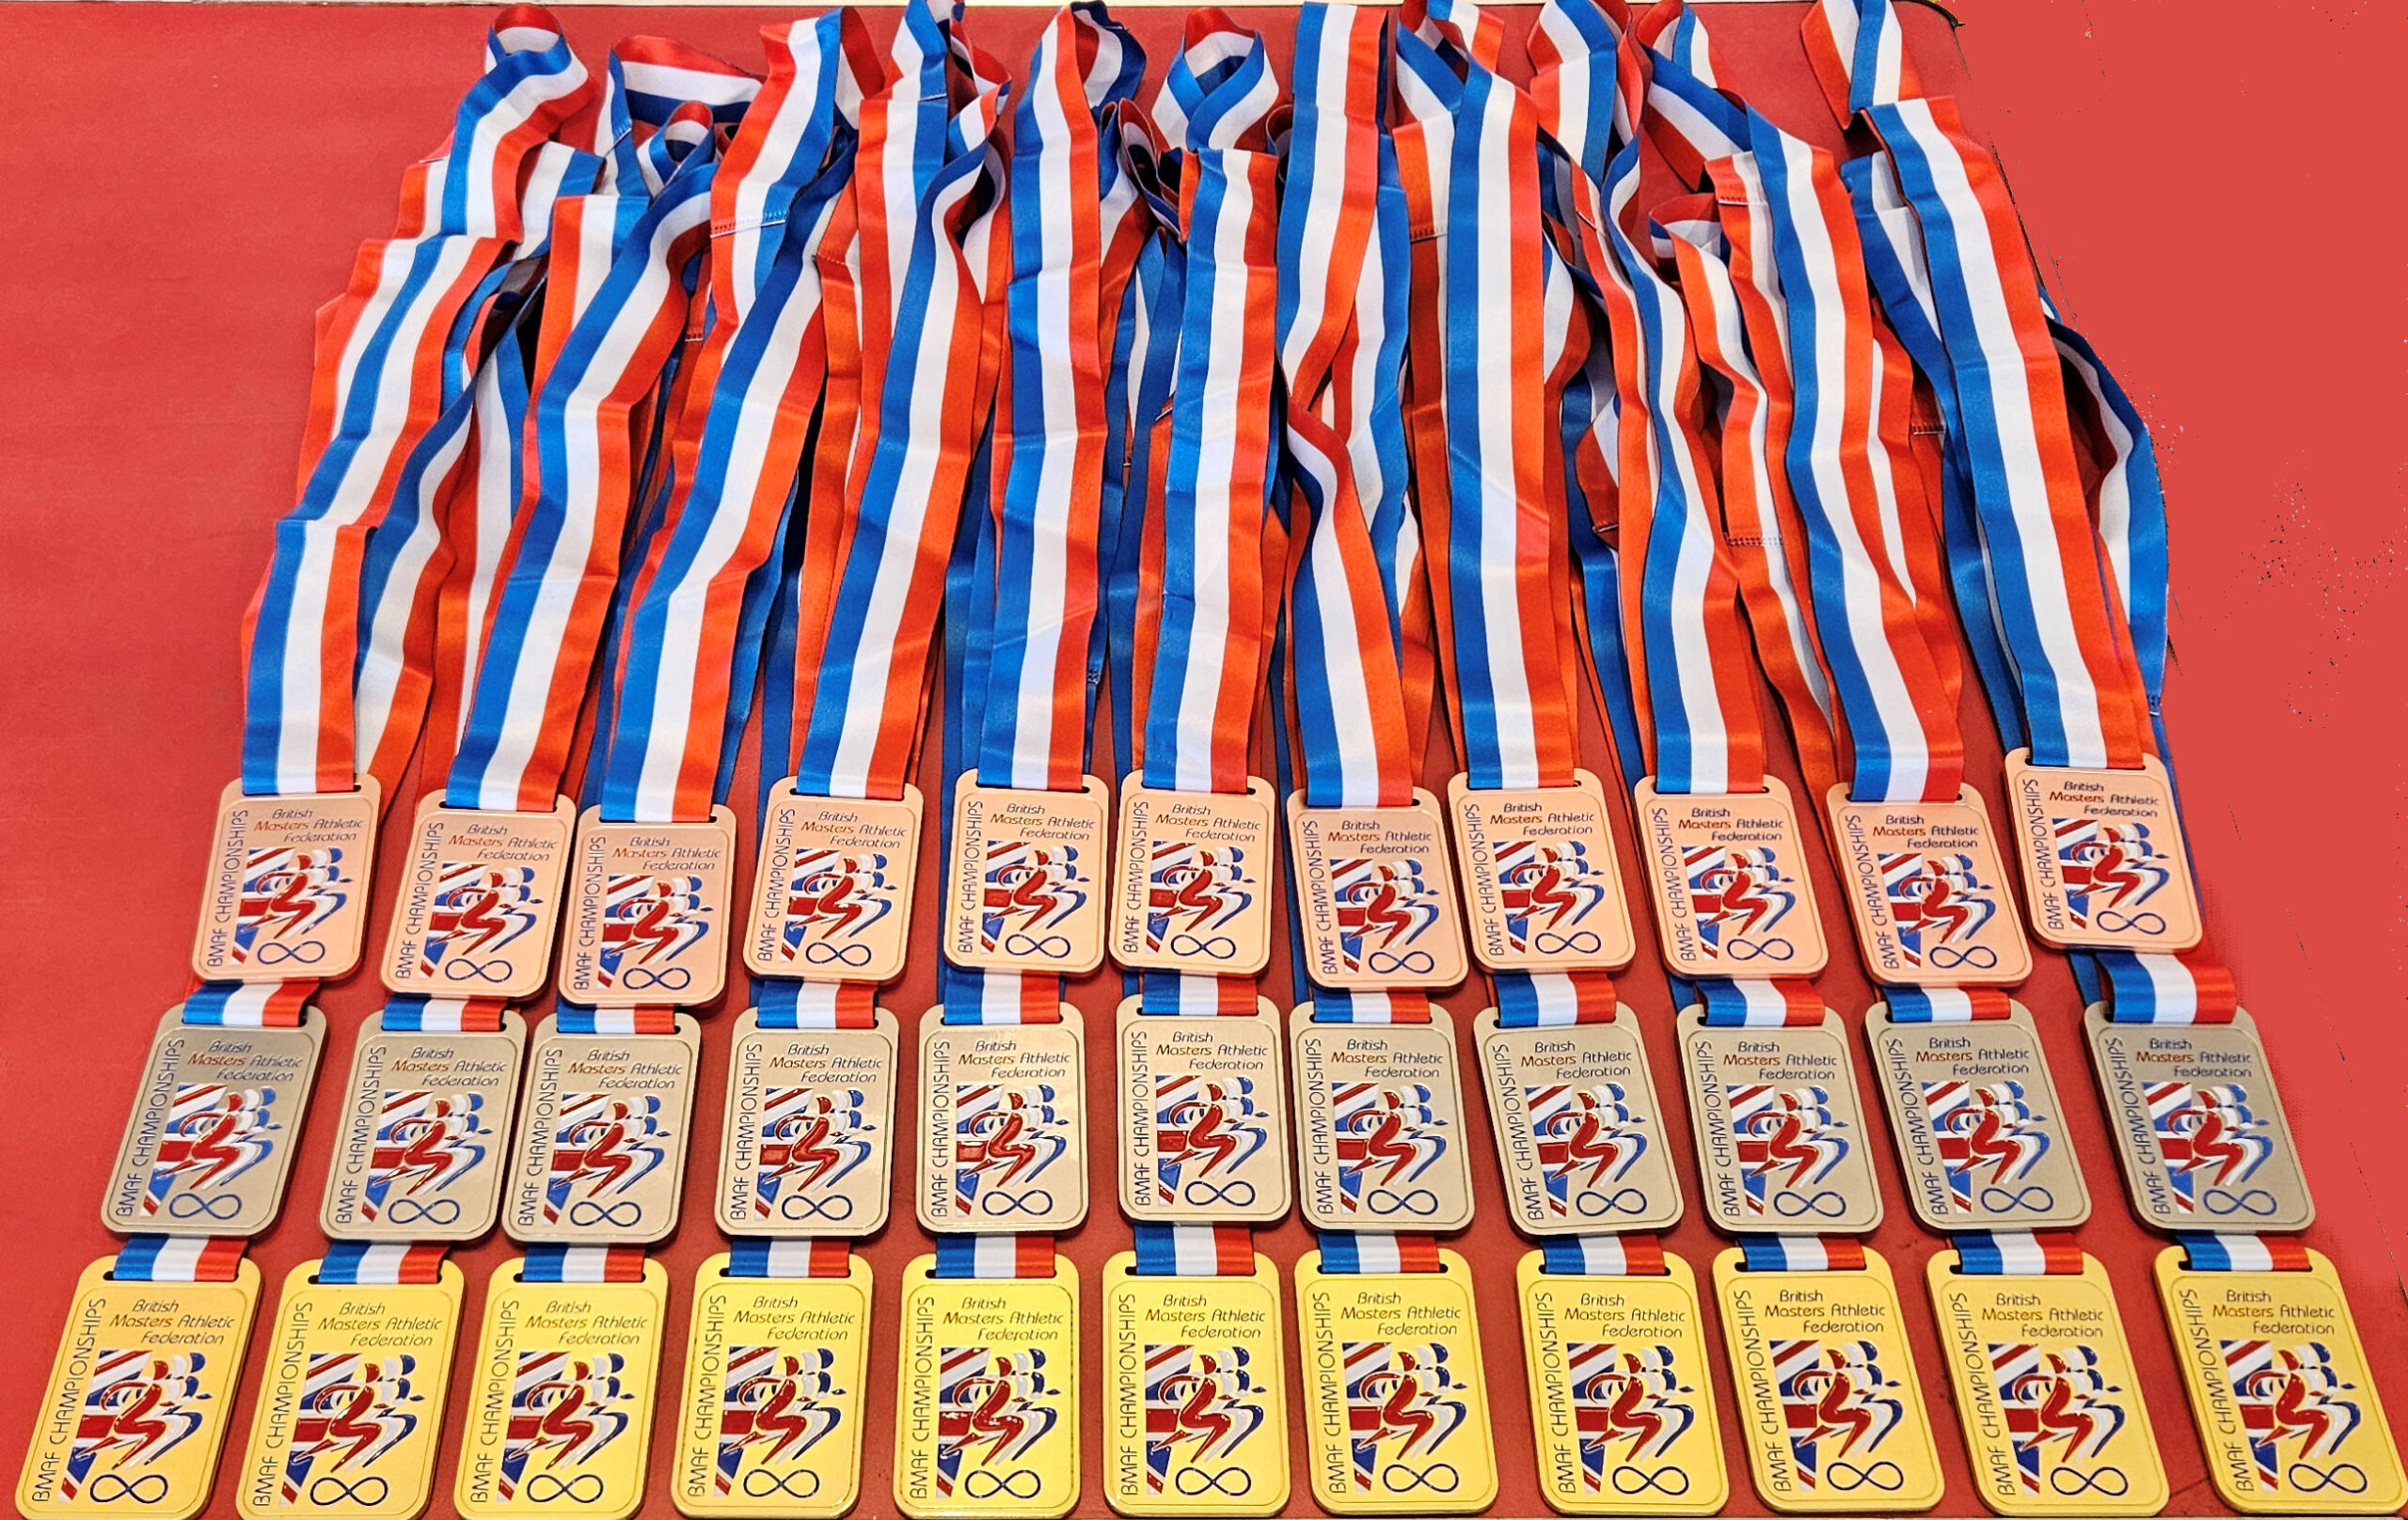 Medals ready for presentation